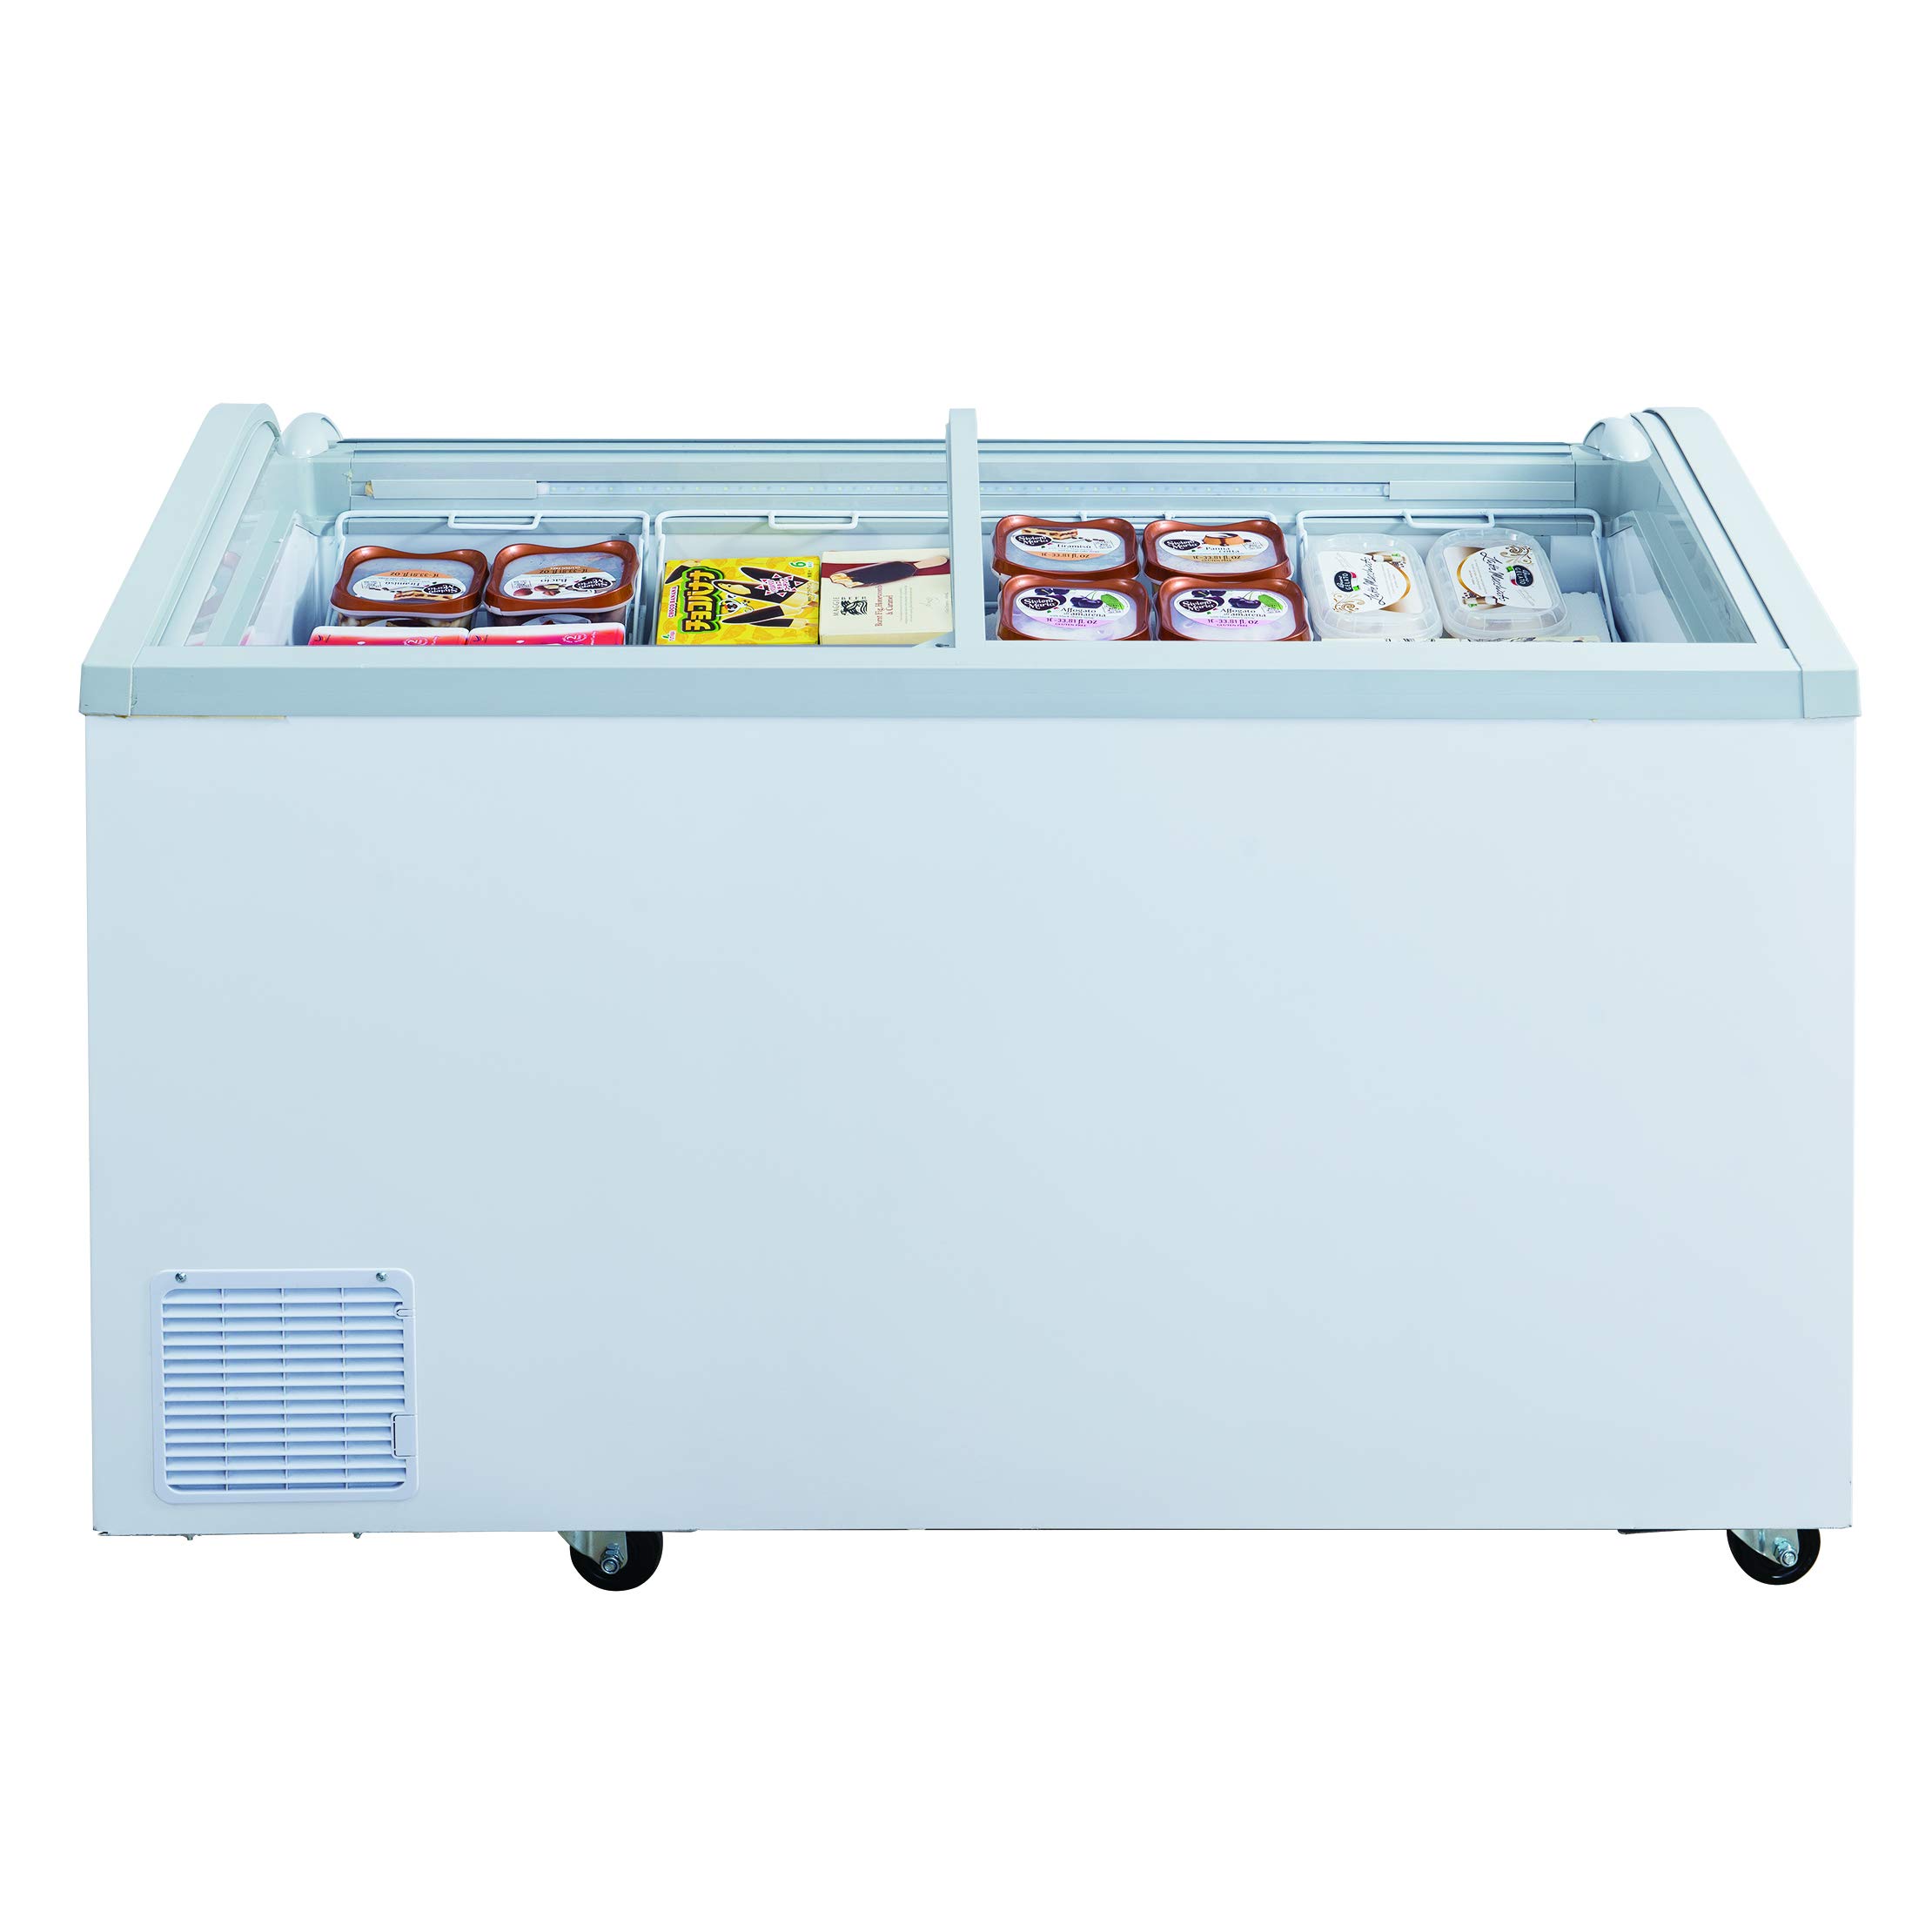 DUKERS WD-500Y 17.6 cu. ft. Commercial Chest Freezer in White